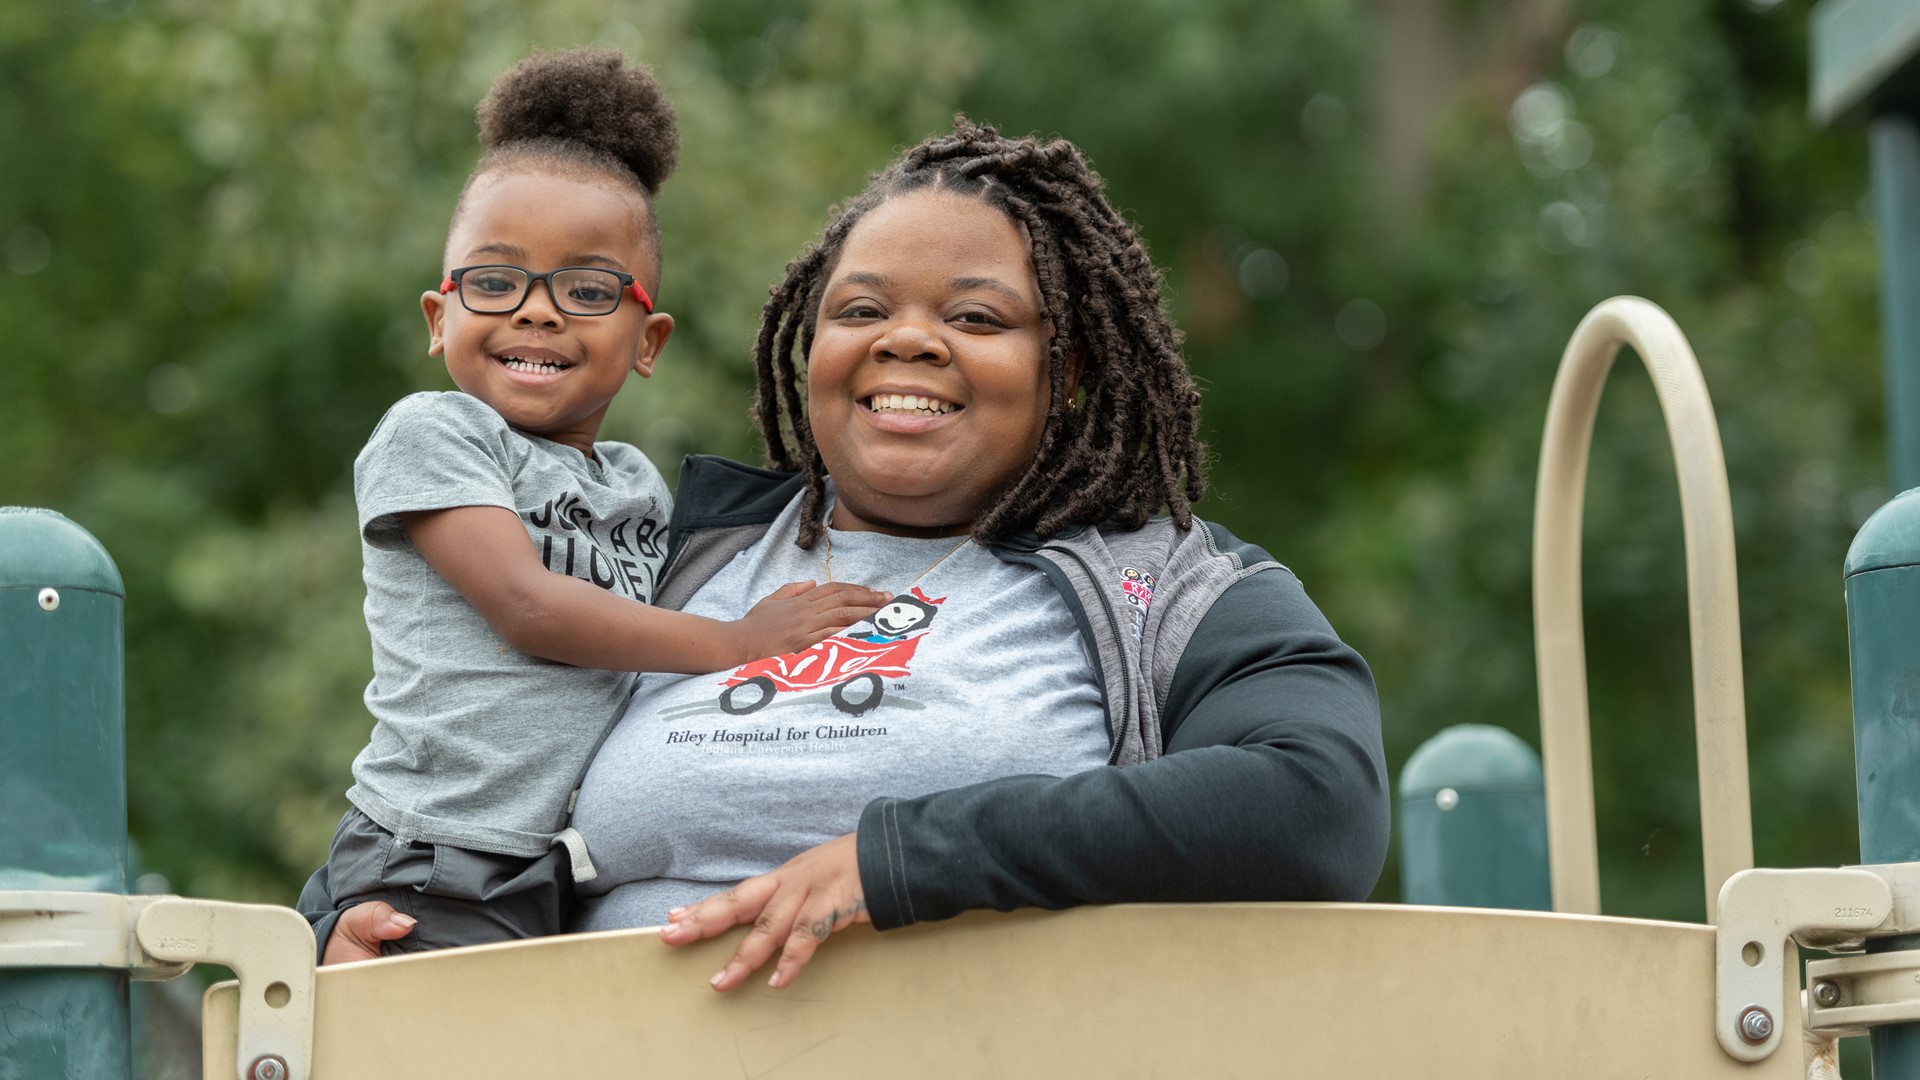 "If it wasn't for them, Caiden would not have made it," Shakilya Rogers said, as she shares her story on Giving Tuesday.